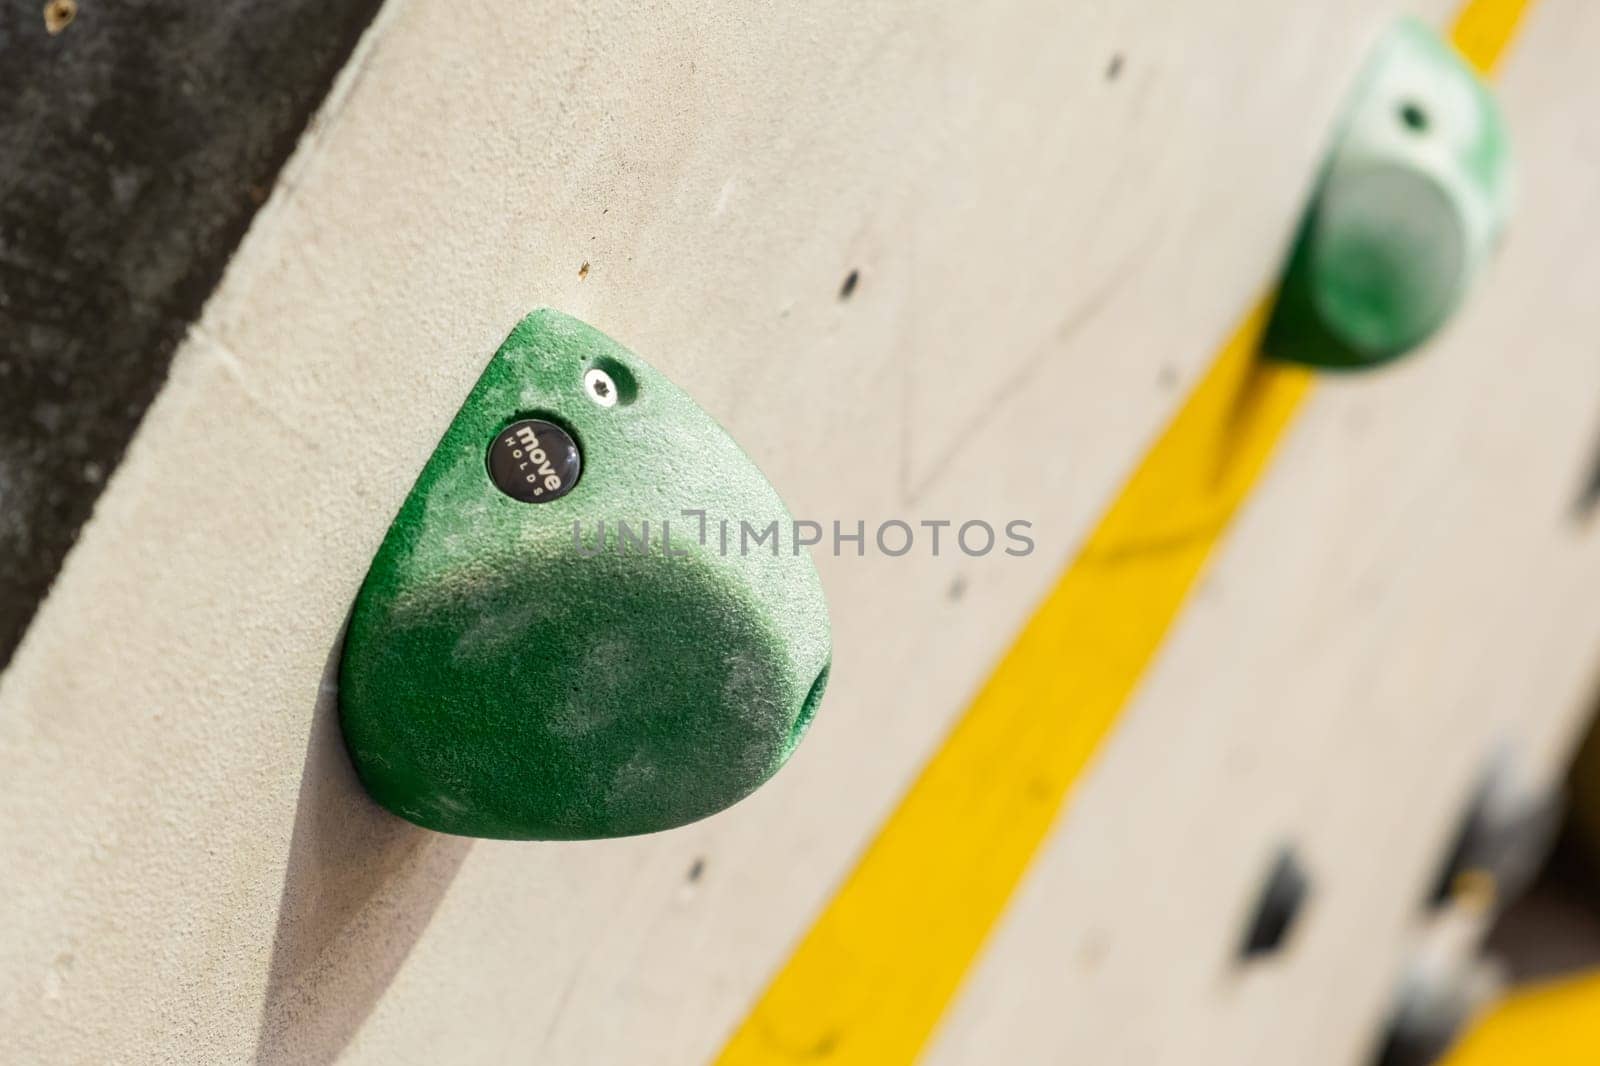 Stone hooks or grips on the artificial climbing wall in bouldering gym.